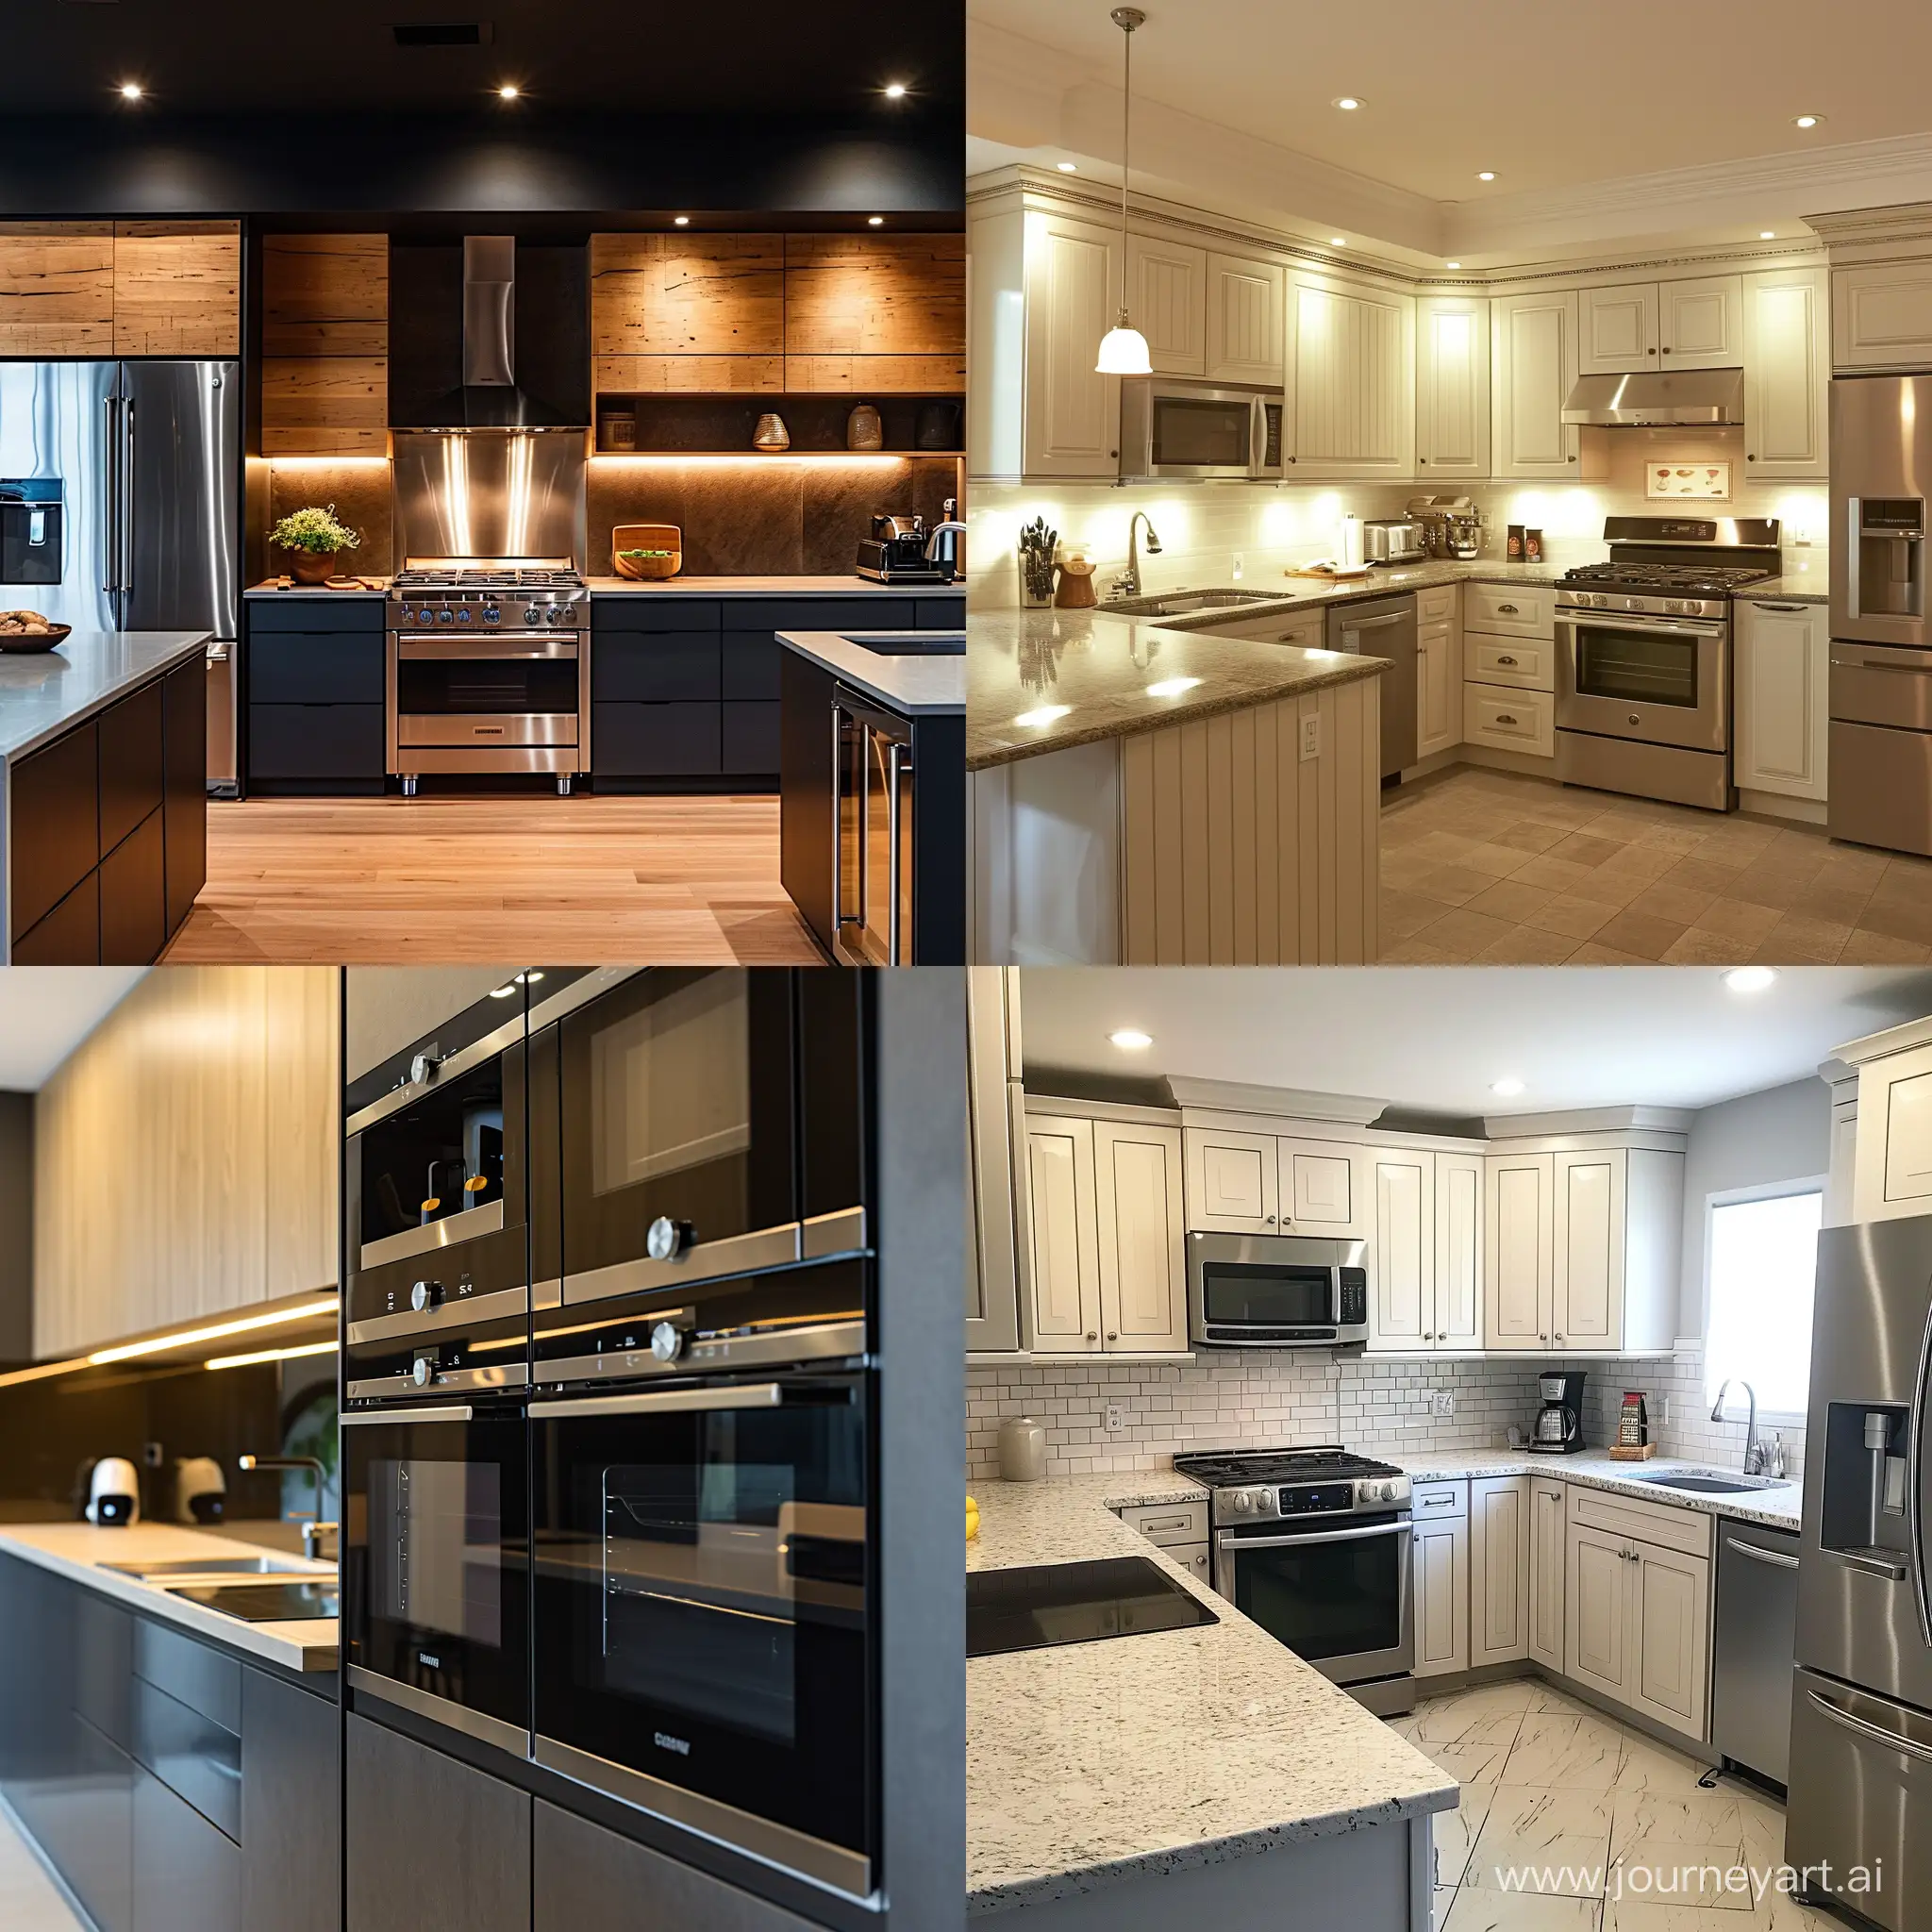 Kitchen electrical installation and remodeling services, Appliance Installation